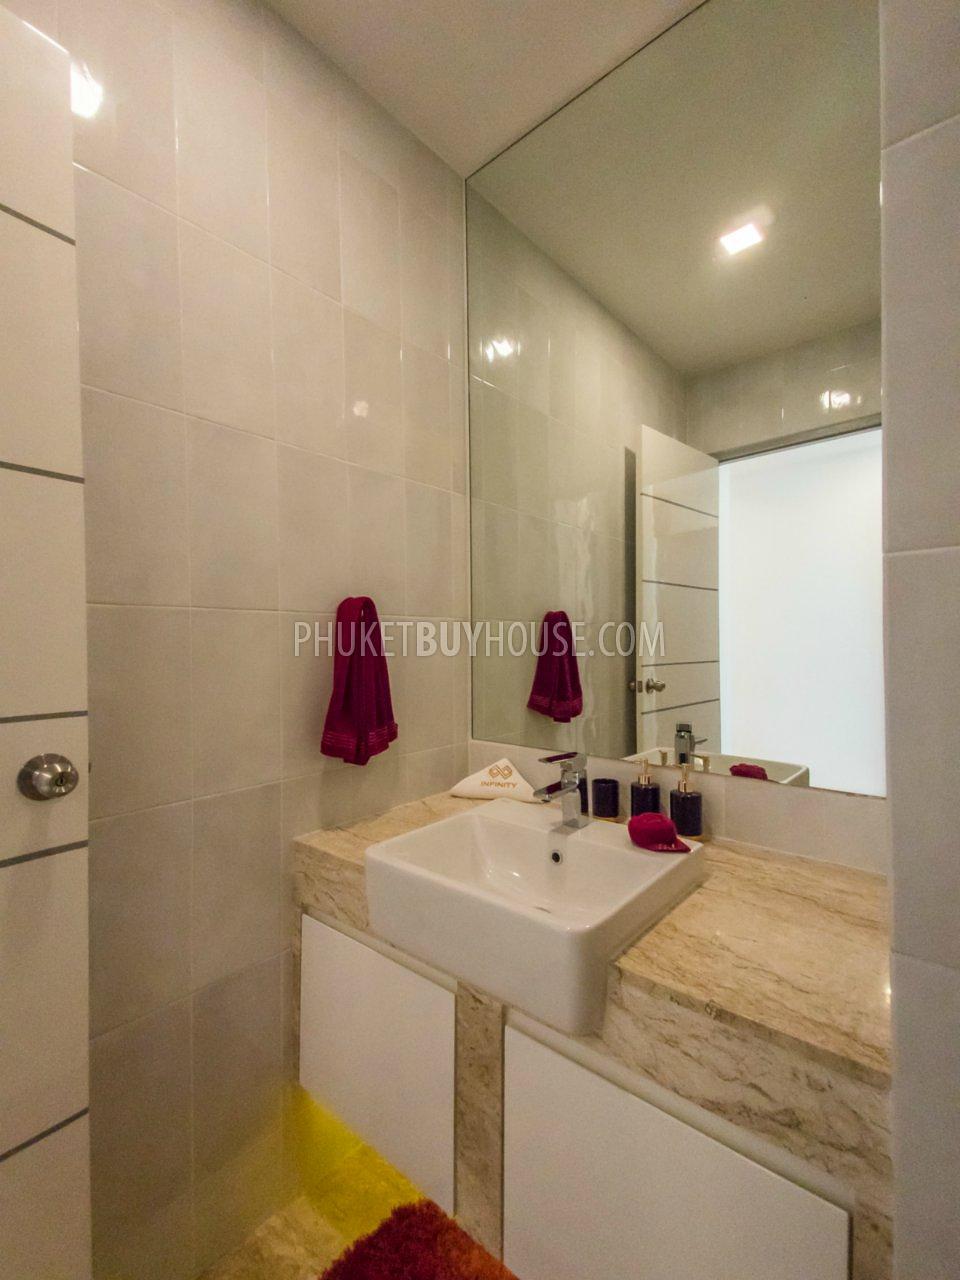 BAN5753: Spectacular 2-Bedroom Apartment in a premium location in Bang Tao Beach. Photo #16